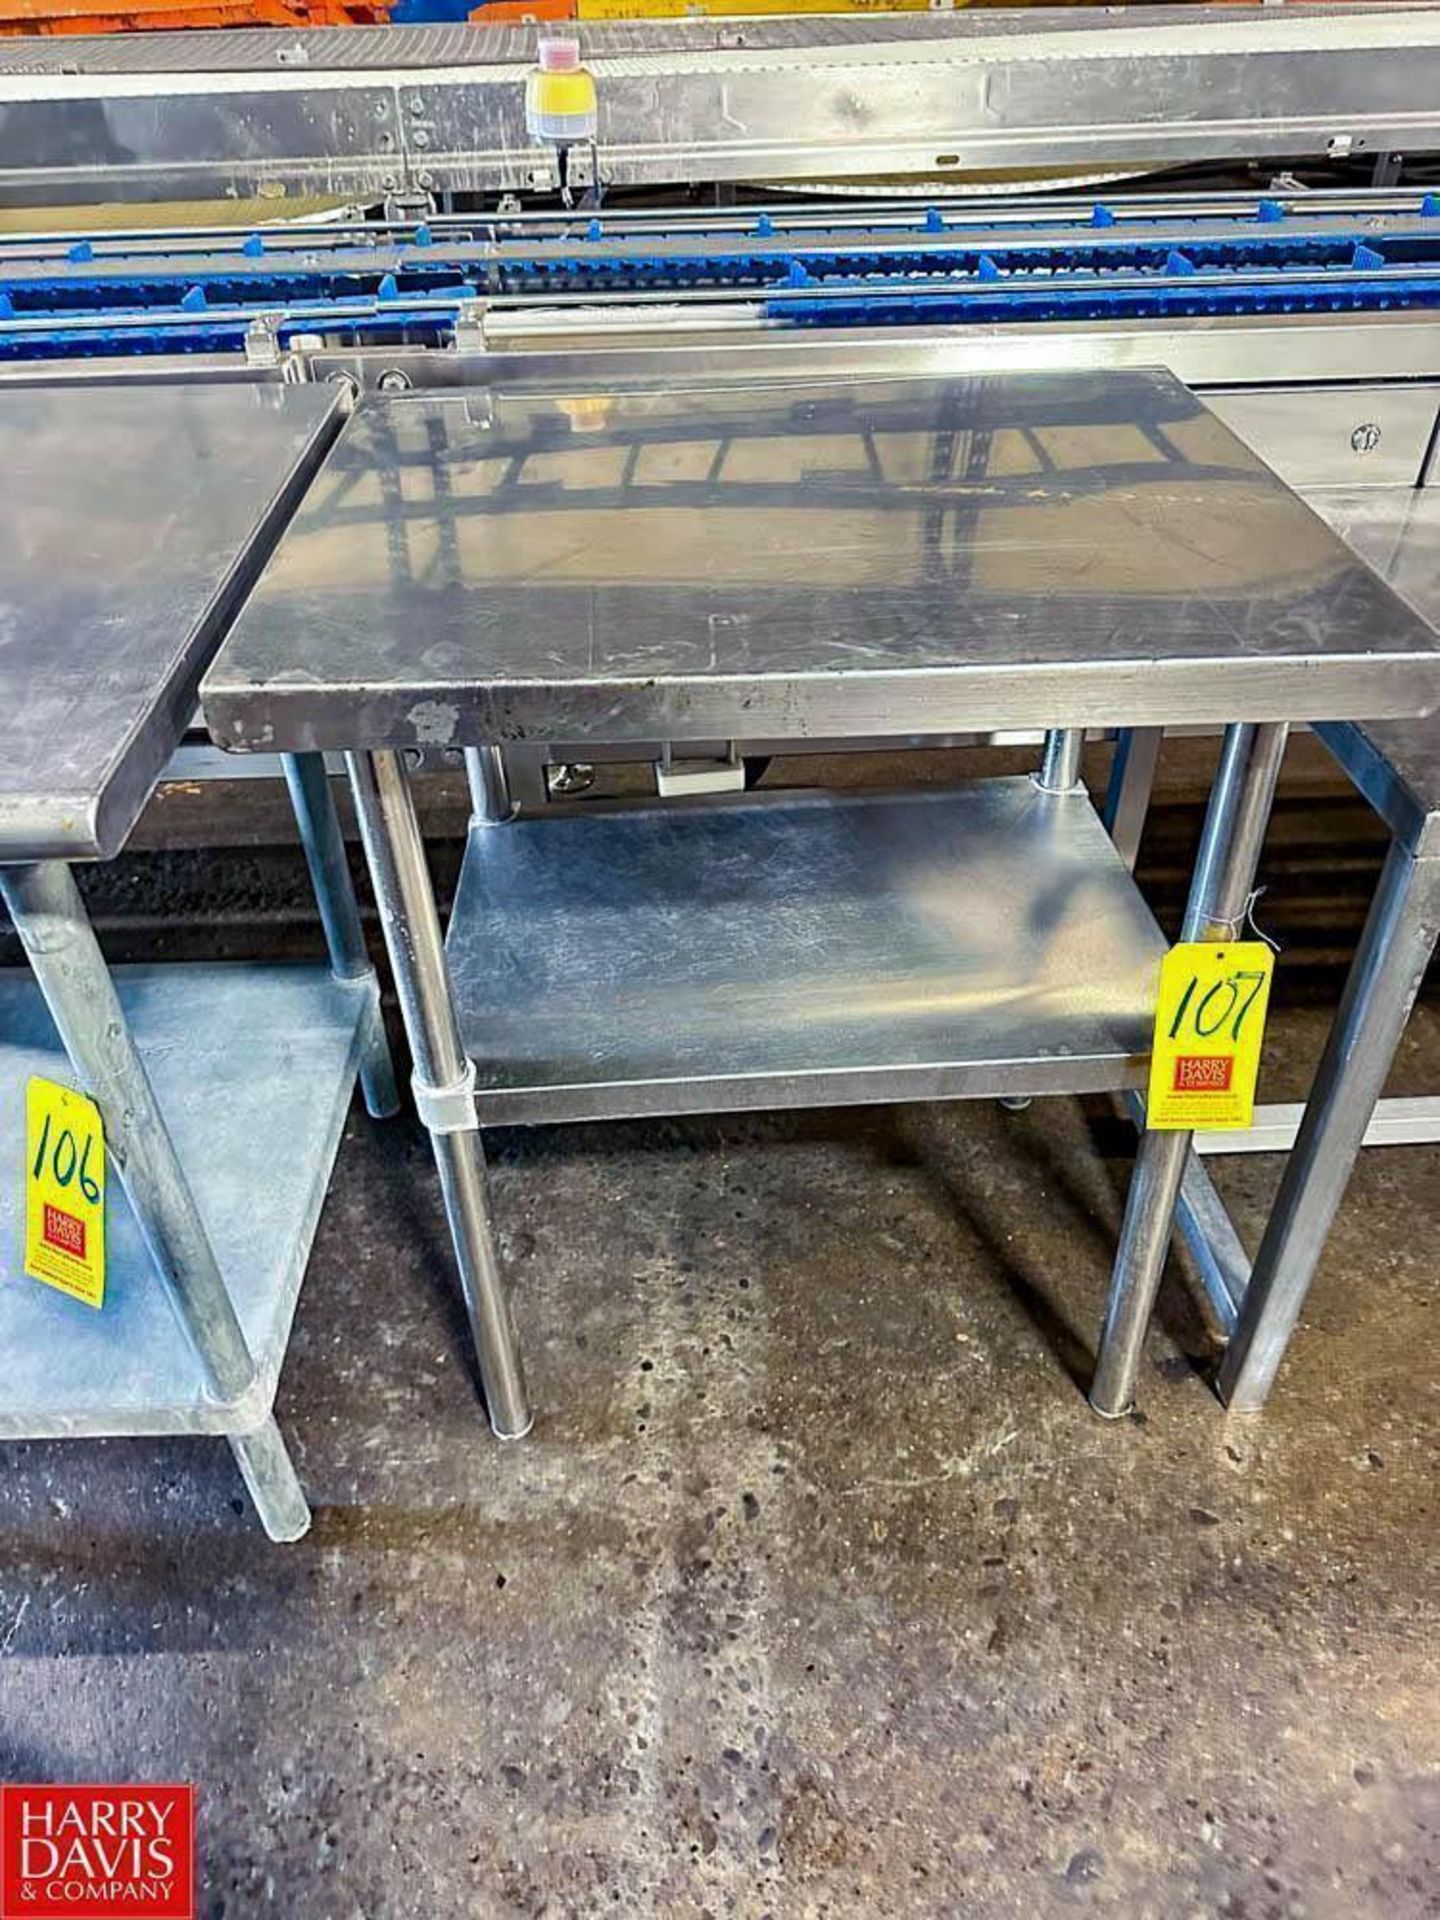 S/S Work Table with S/S Under Shelf, Dimensions = 30" x 2' - Rigging Fee: $50